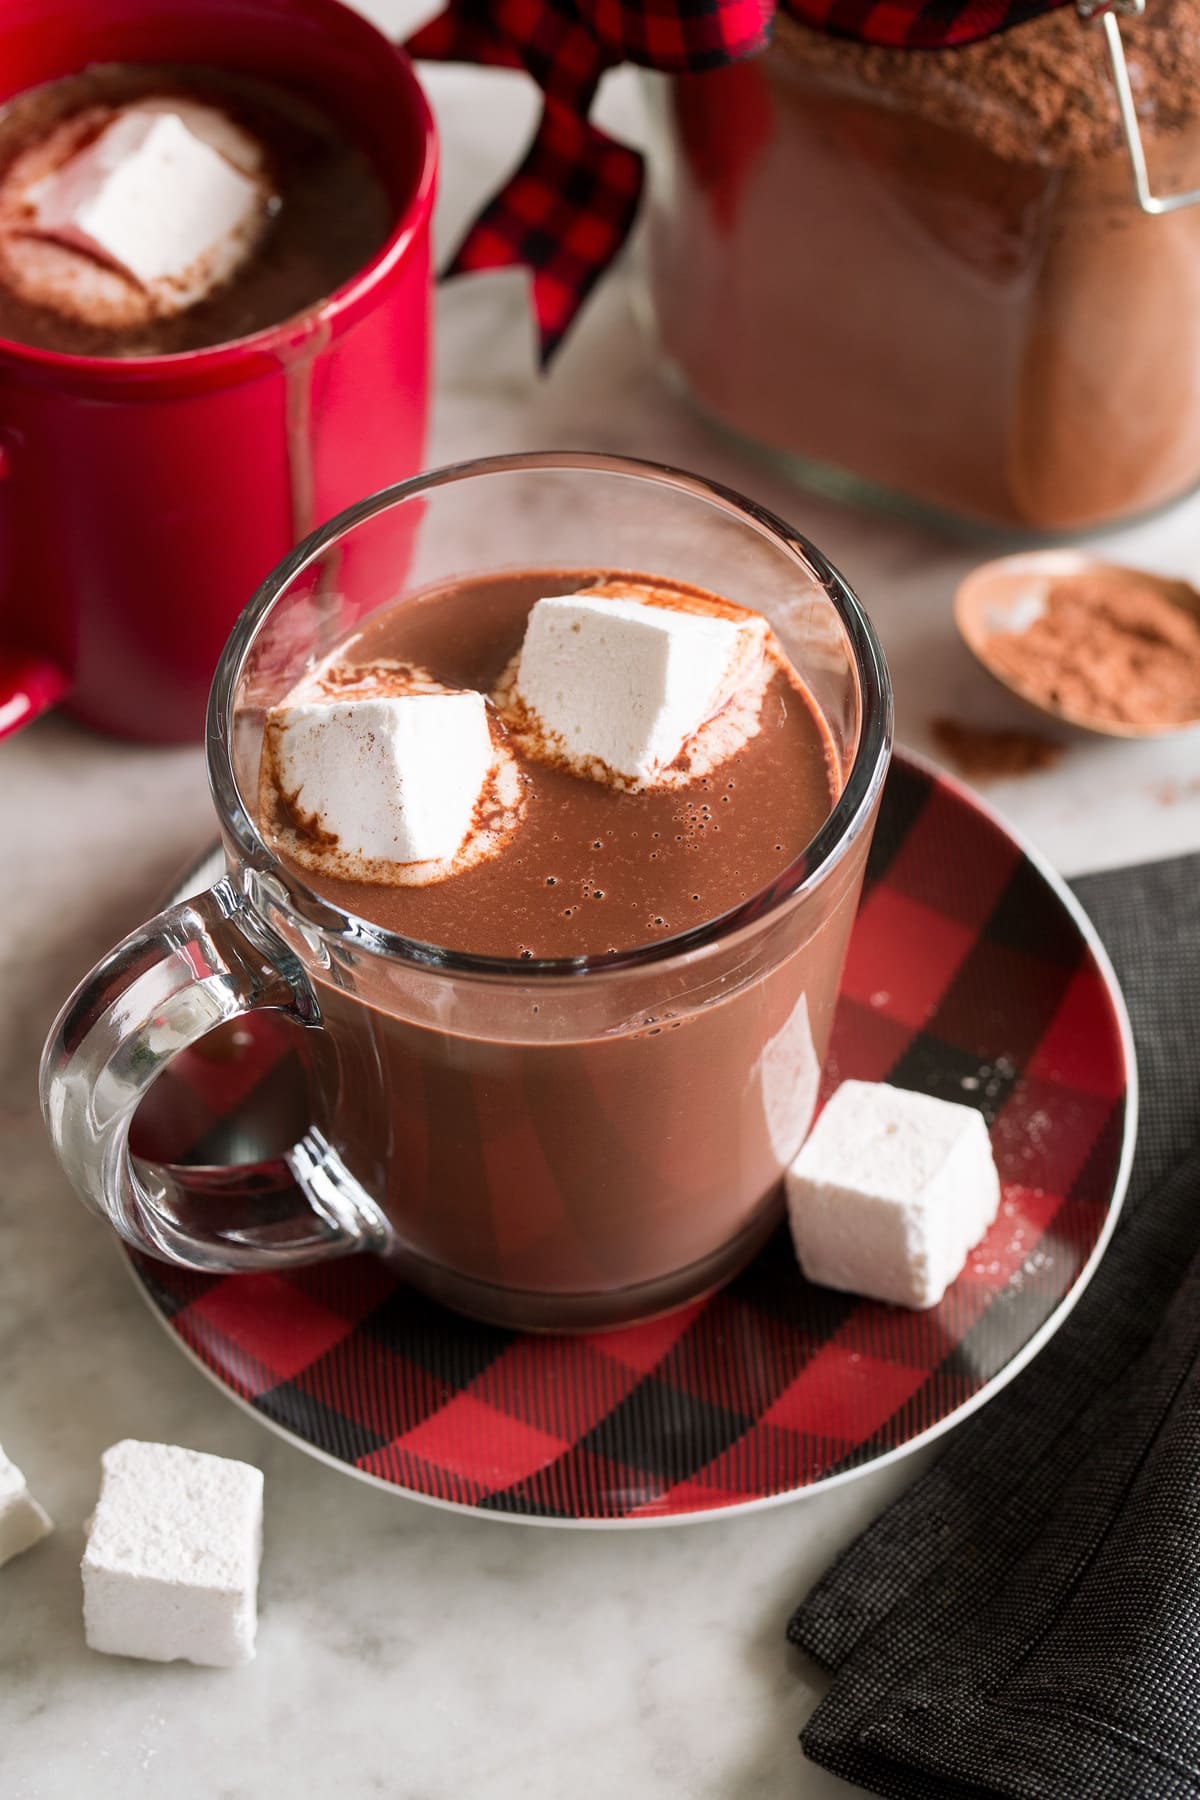 Hot chocolate mix shown prepared in a mug with milk and topped with marshmallows.